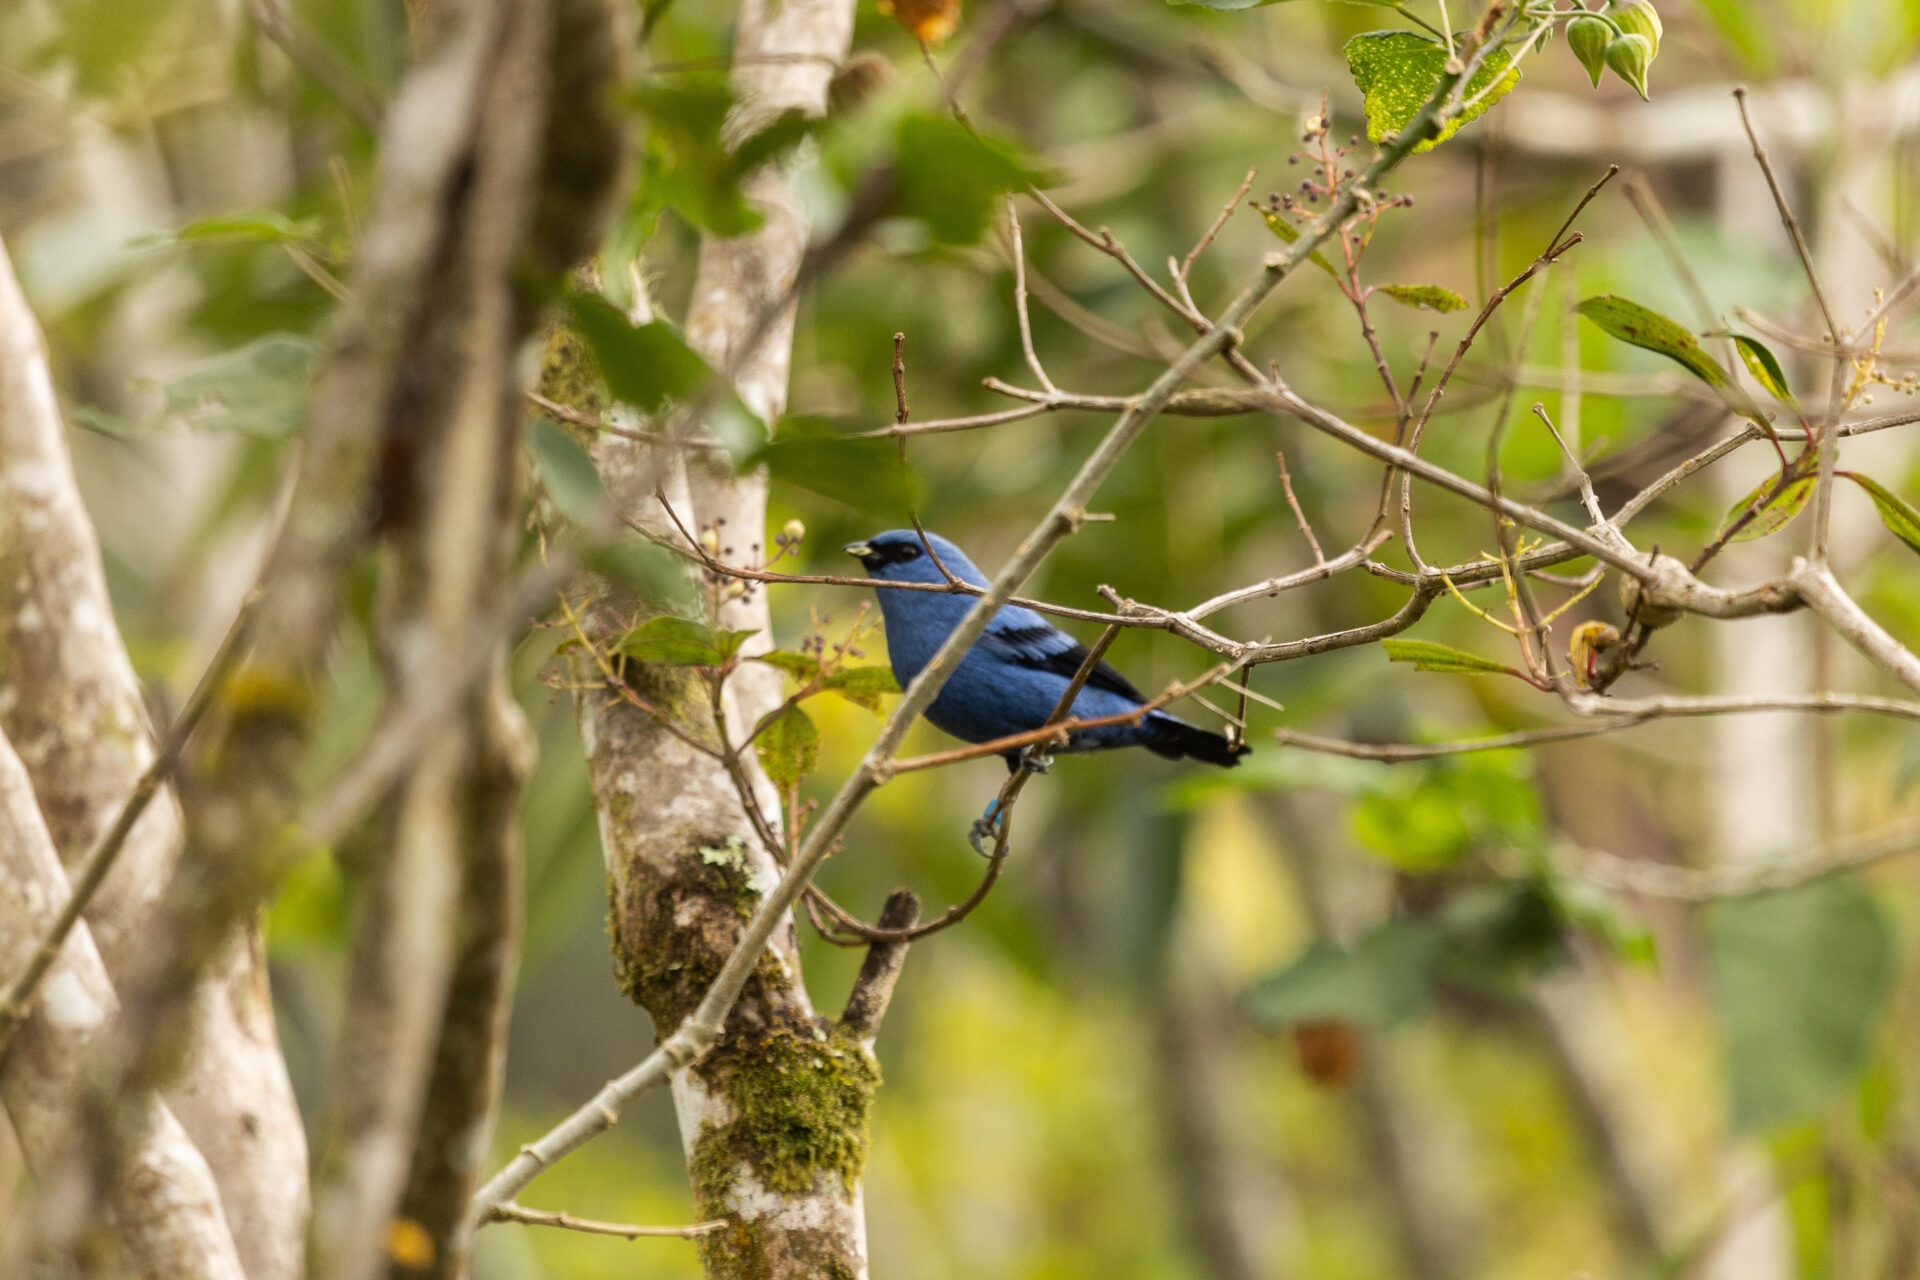 A Blue-and-black Tanager is shown perched on a branch